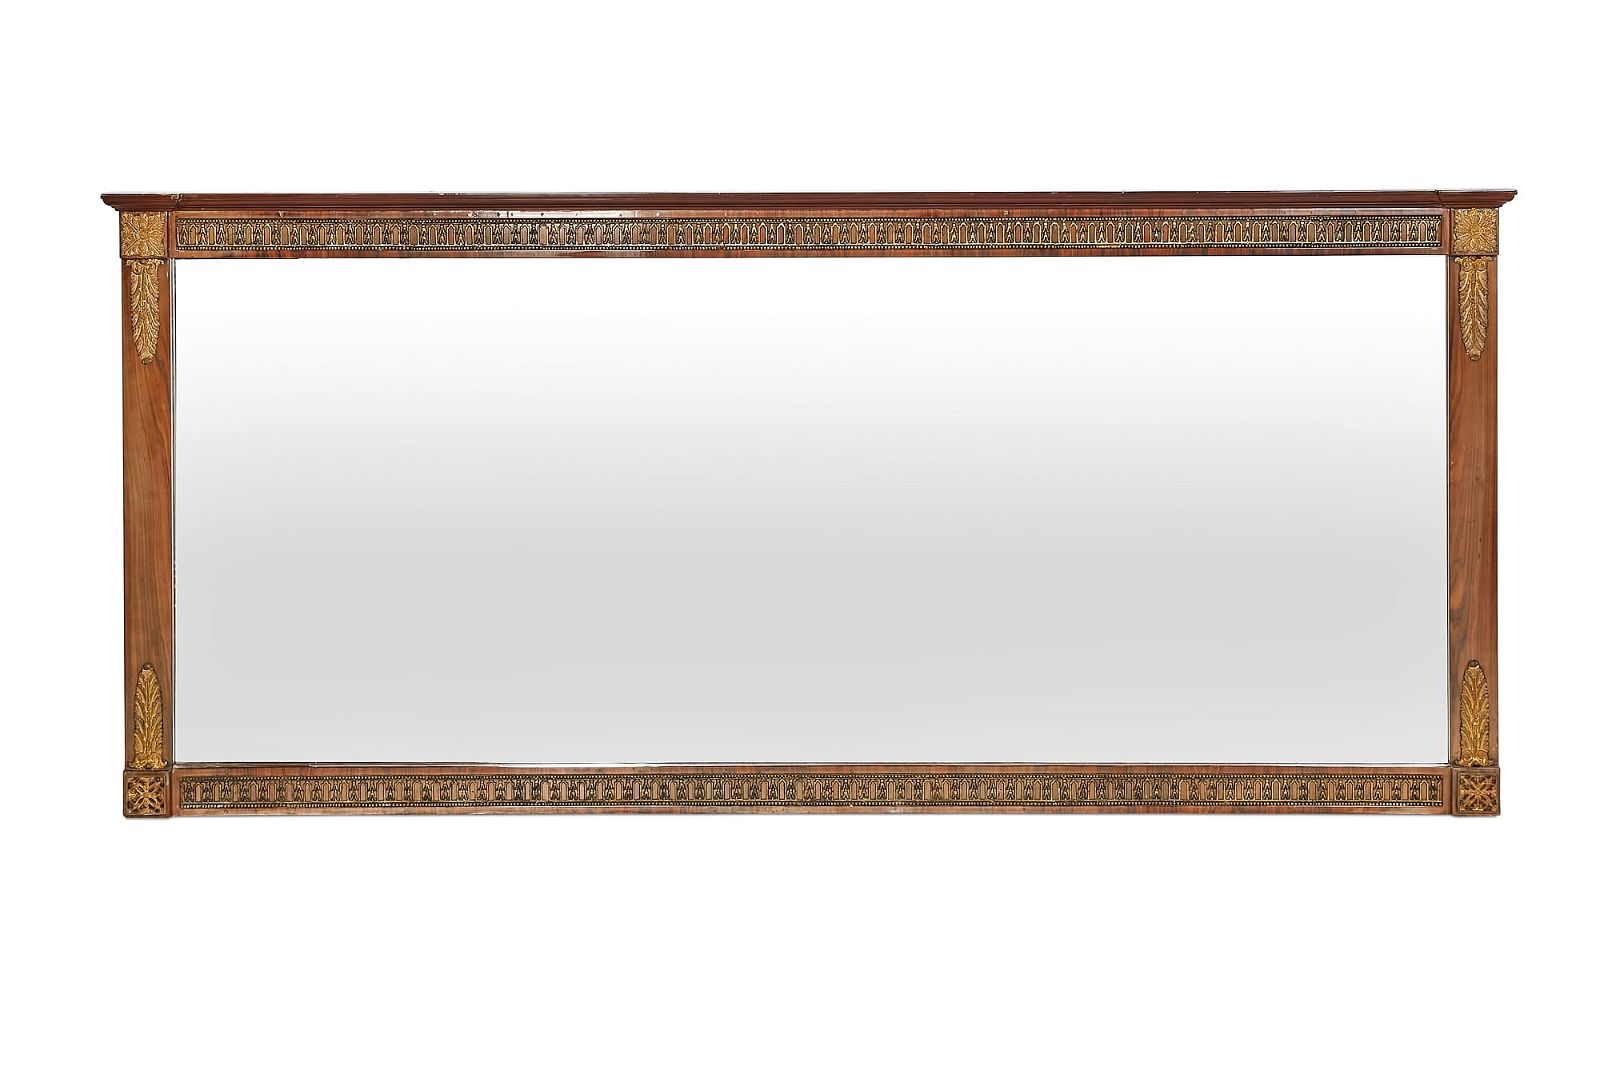 A NEOCLASSICAL STYLE WALNUT OVERMANTEL 2fb31f9